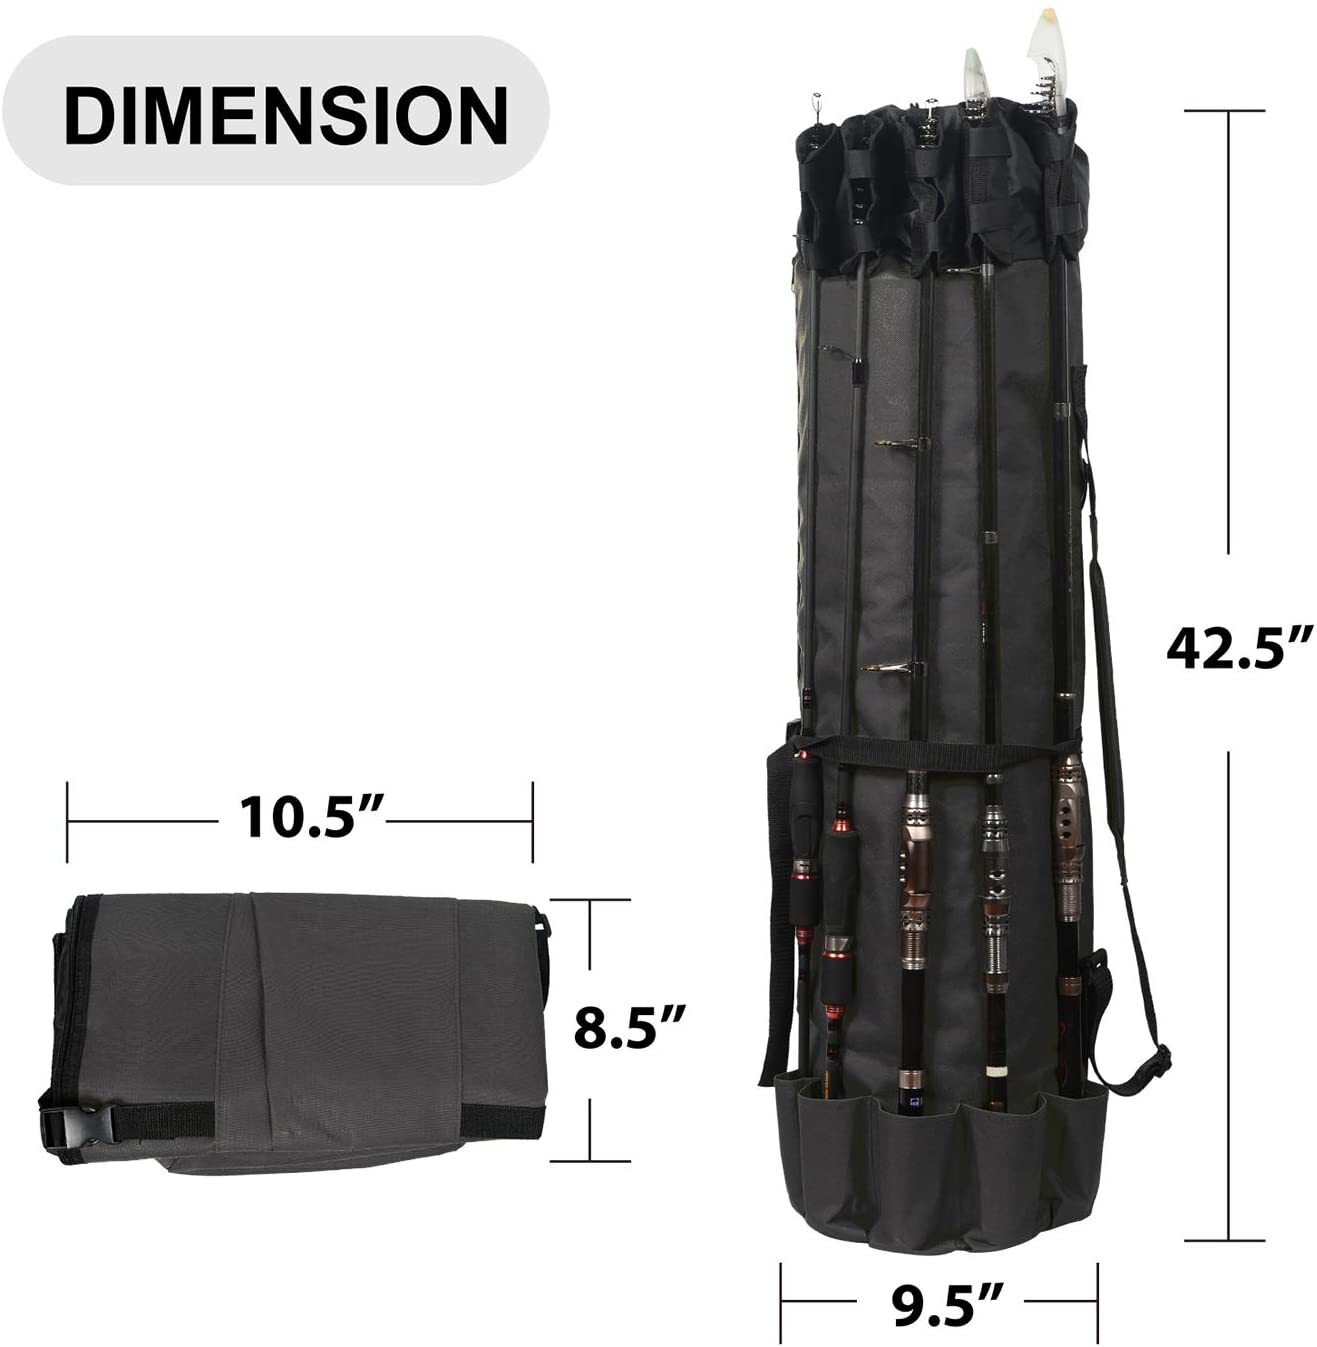  LEADALLWAY Fishing Rod Bag Durable Folding Oxford Fabric  Fishing Tackle Carry Case Bag Multifunction Large Capacity Waterproof  Fishing Rod Case Holds 5 Poles : Clothing, Shoes & Jewelry